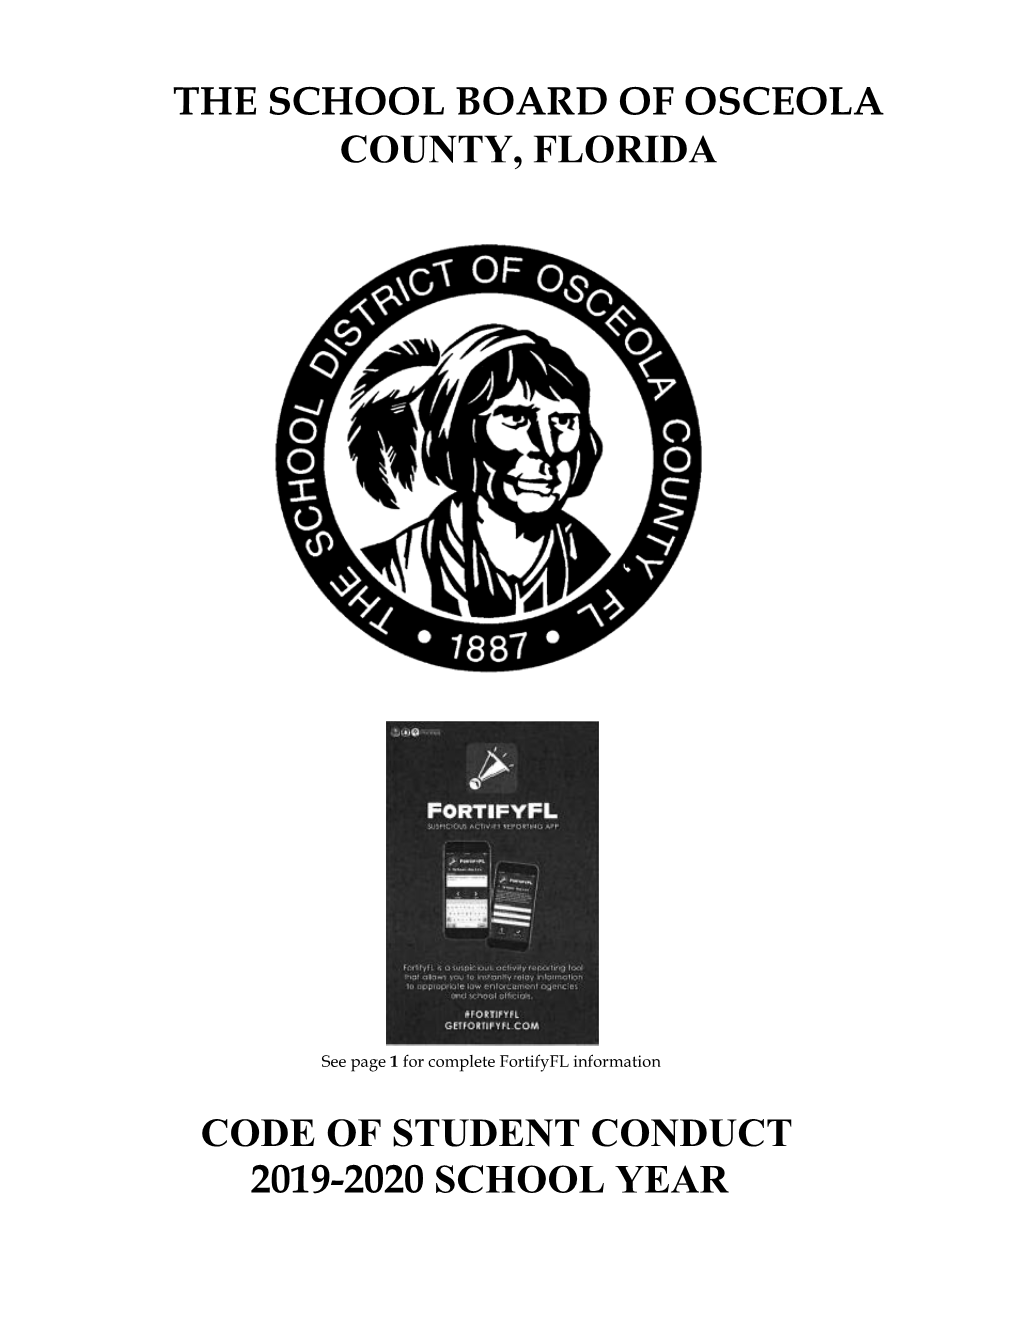 Code of Student Conduct 2019-2020 School Year